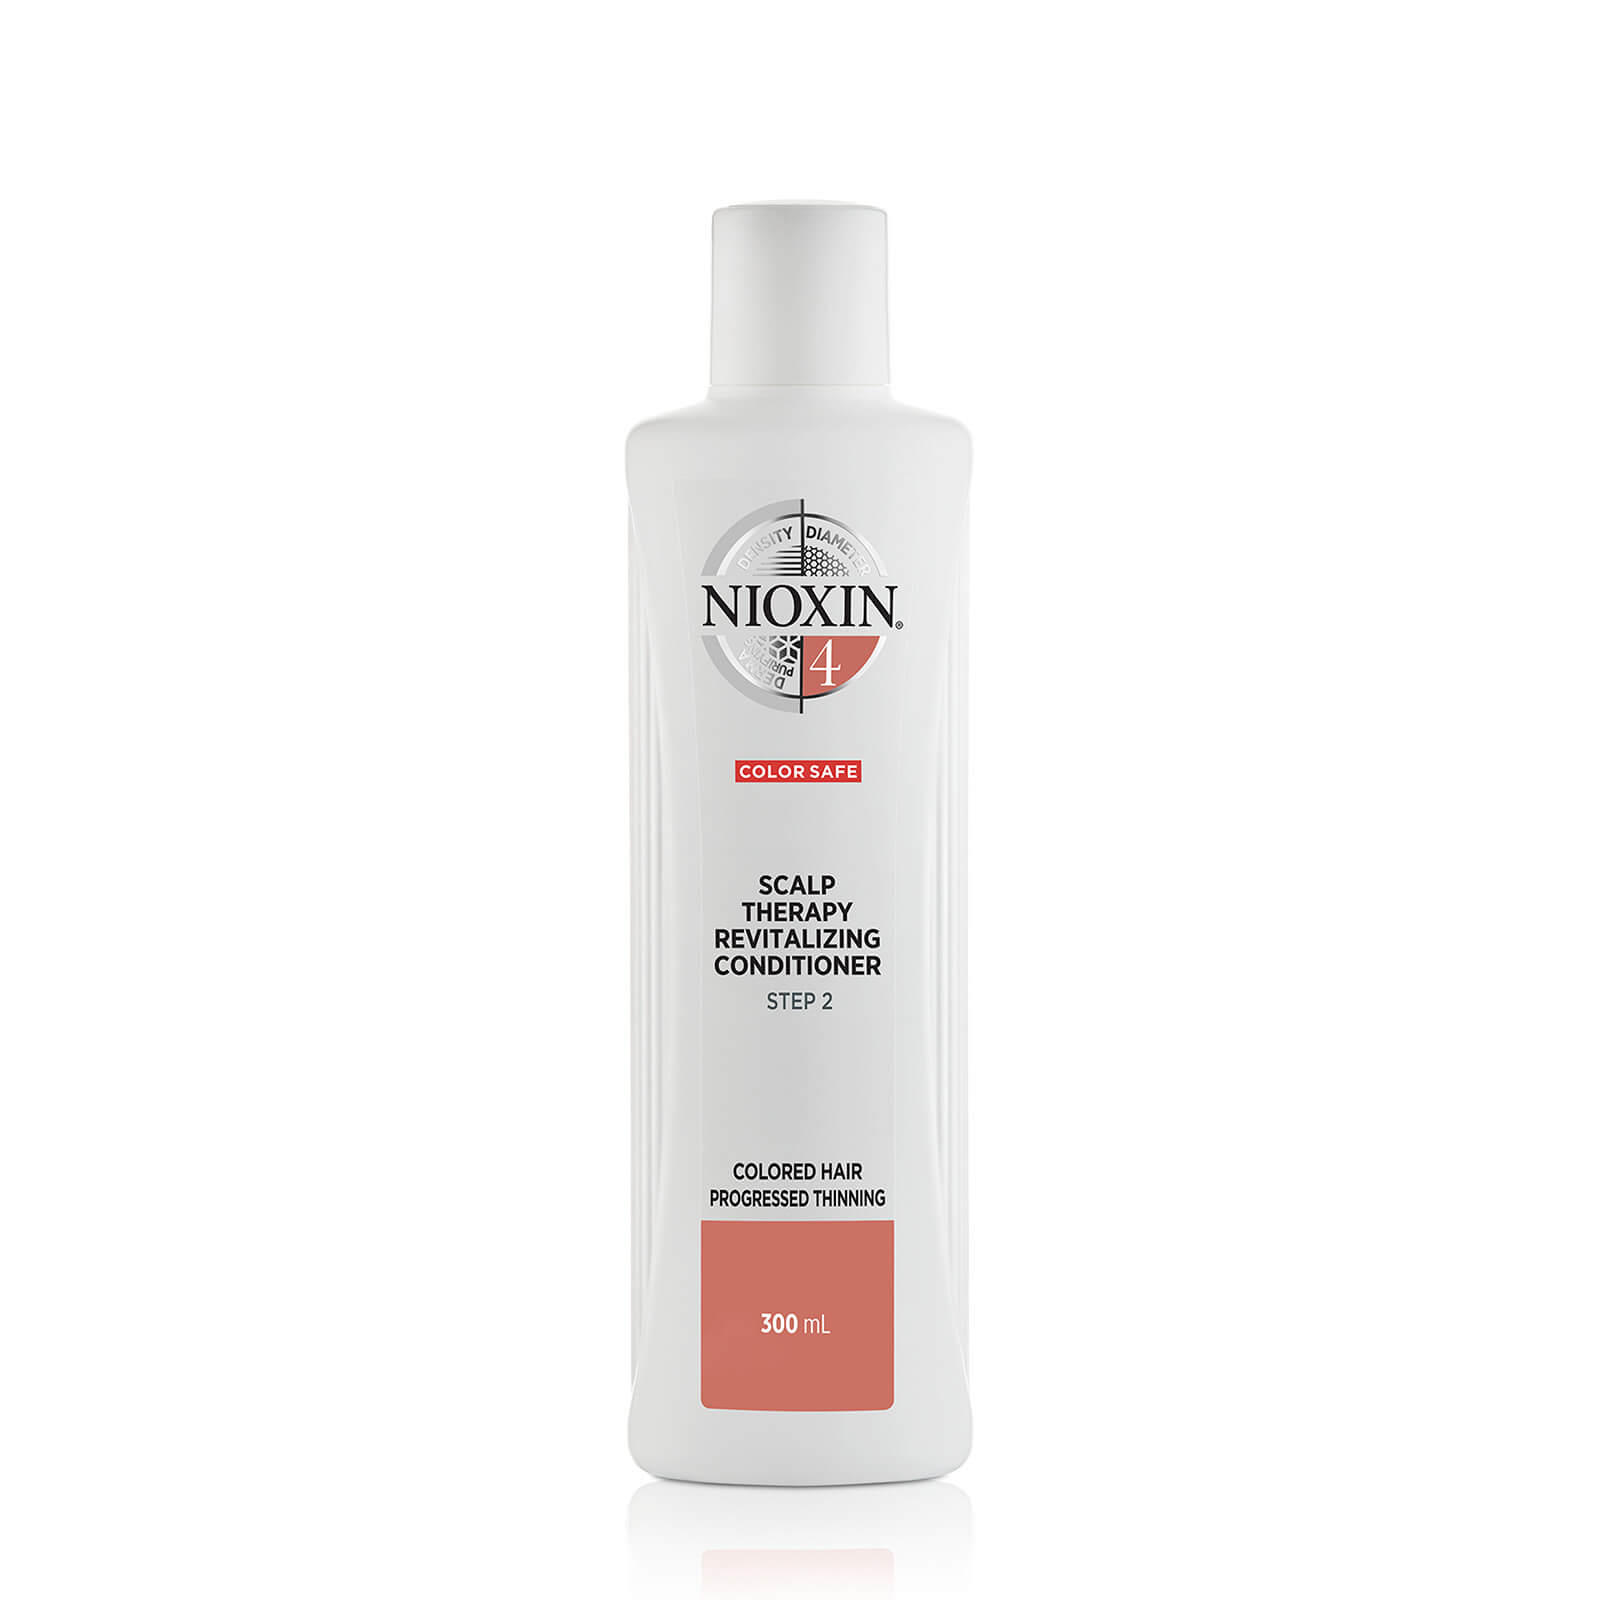 NIOXIN 3-Part System 4 Scalp Therapy Revitalising Conditioner for Coloured Hair with Progressed Thin